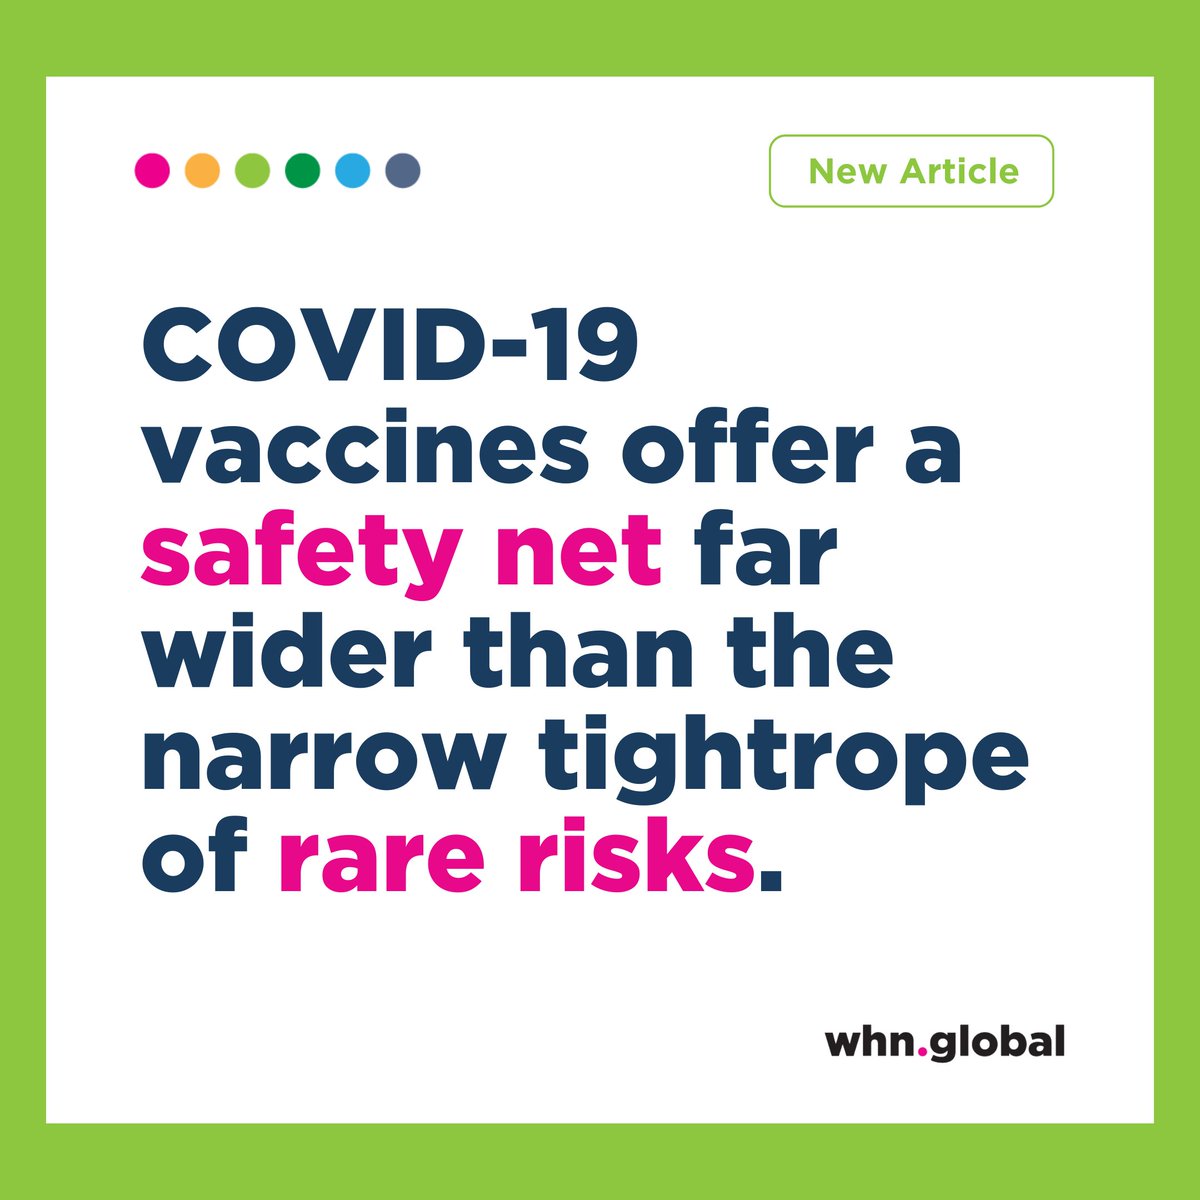 Let's set the record straight on #COVID19 vaccines. Concerns about potential risks are valid, but context is key. The reality? #Vaccination offers protection that far outweighs the rare risks. Read our latest article for a deeper dive → whn.global/debunking-misc…